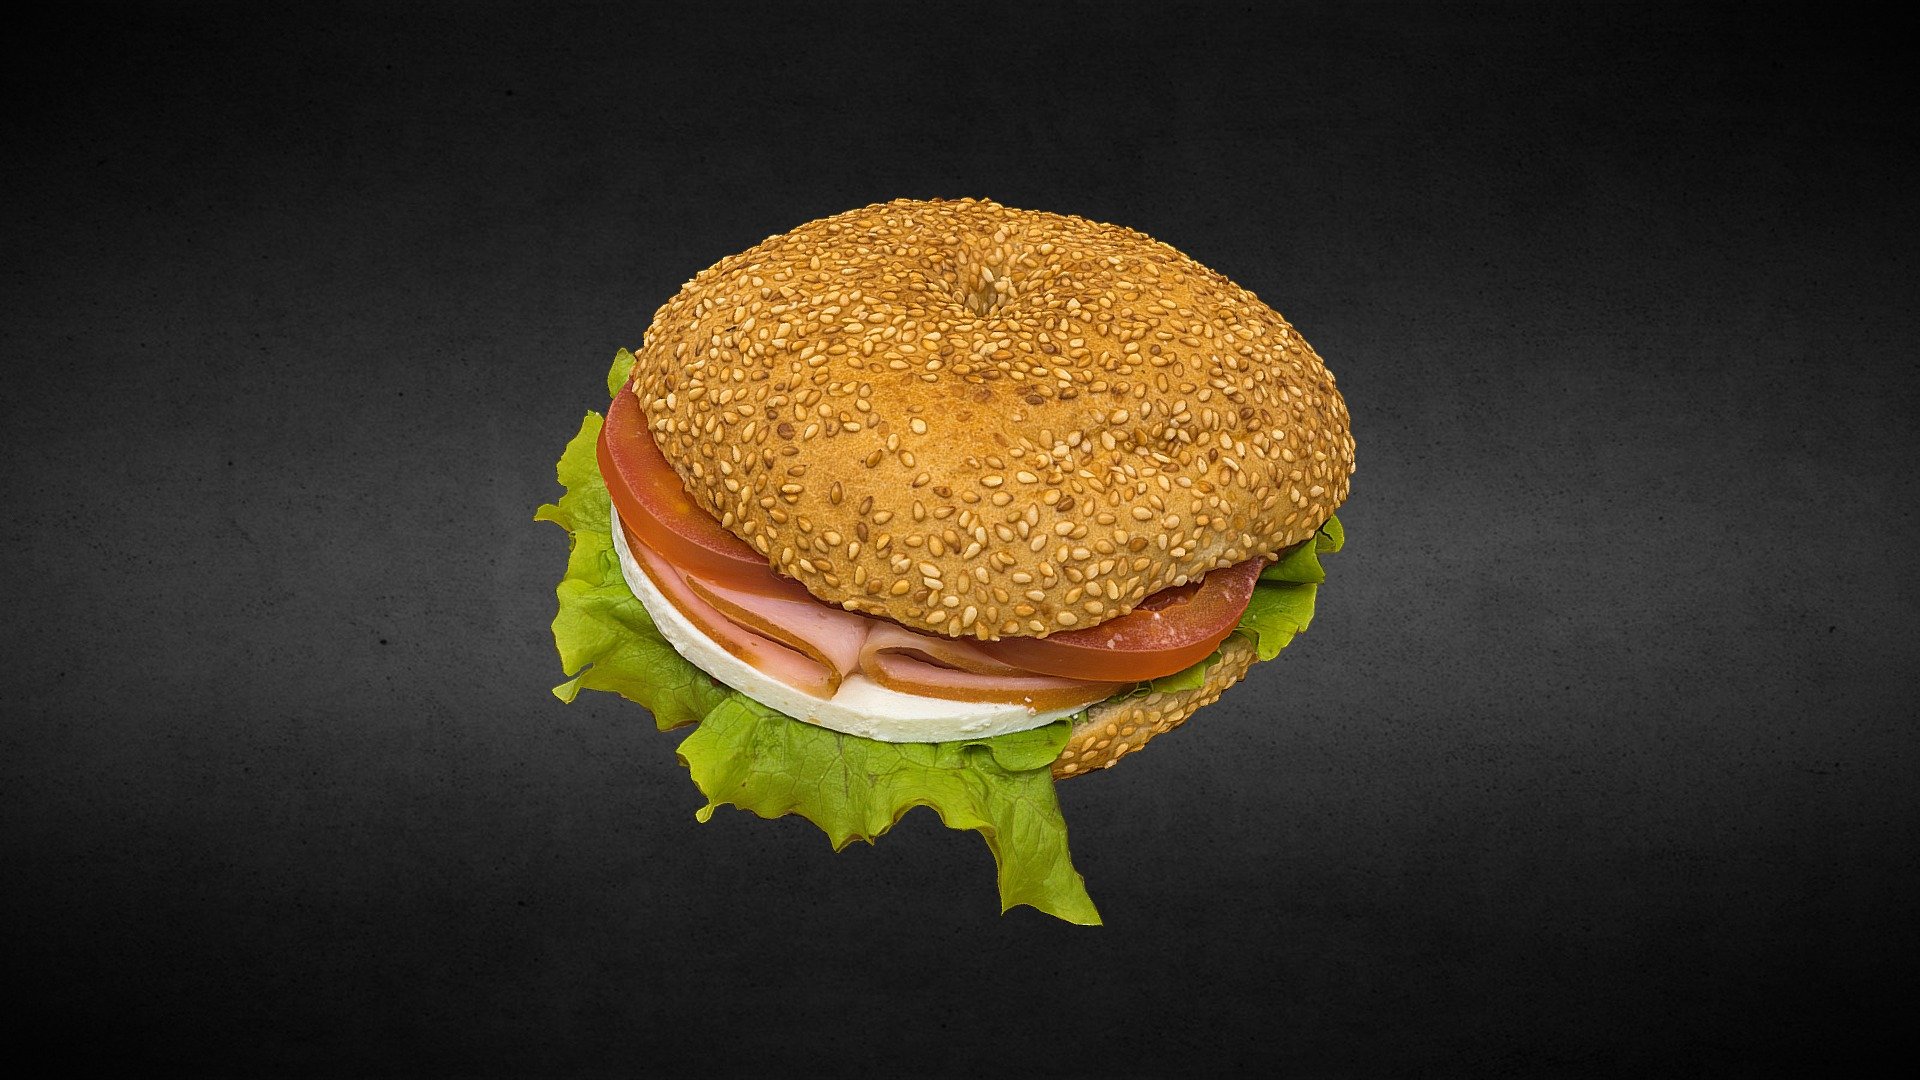 A photogrammetry 3d scan on a sandwich with manouri cheese, tomato and lettuce 3d model